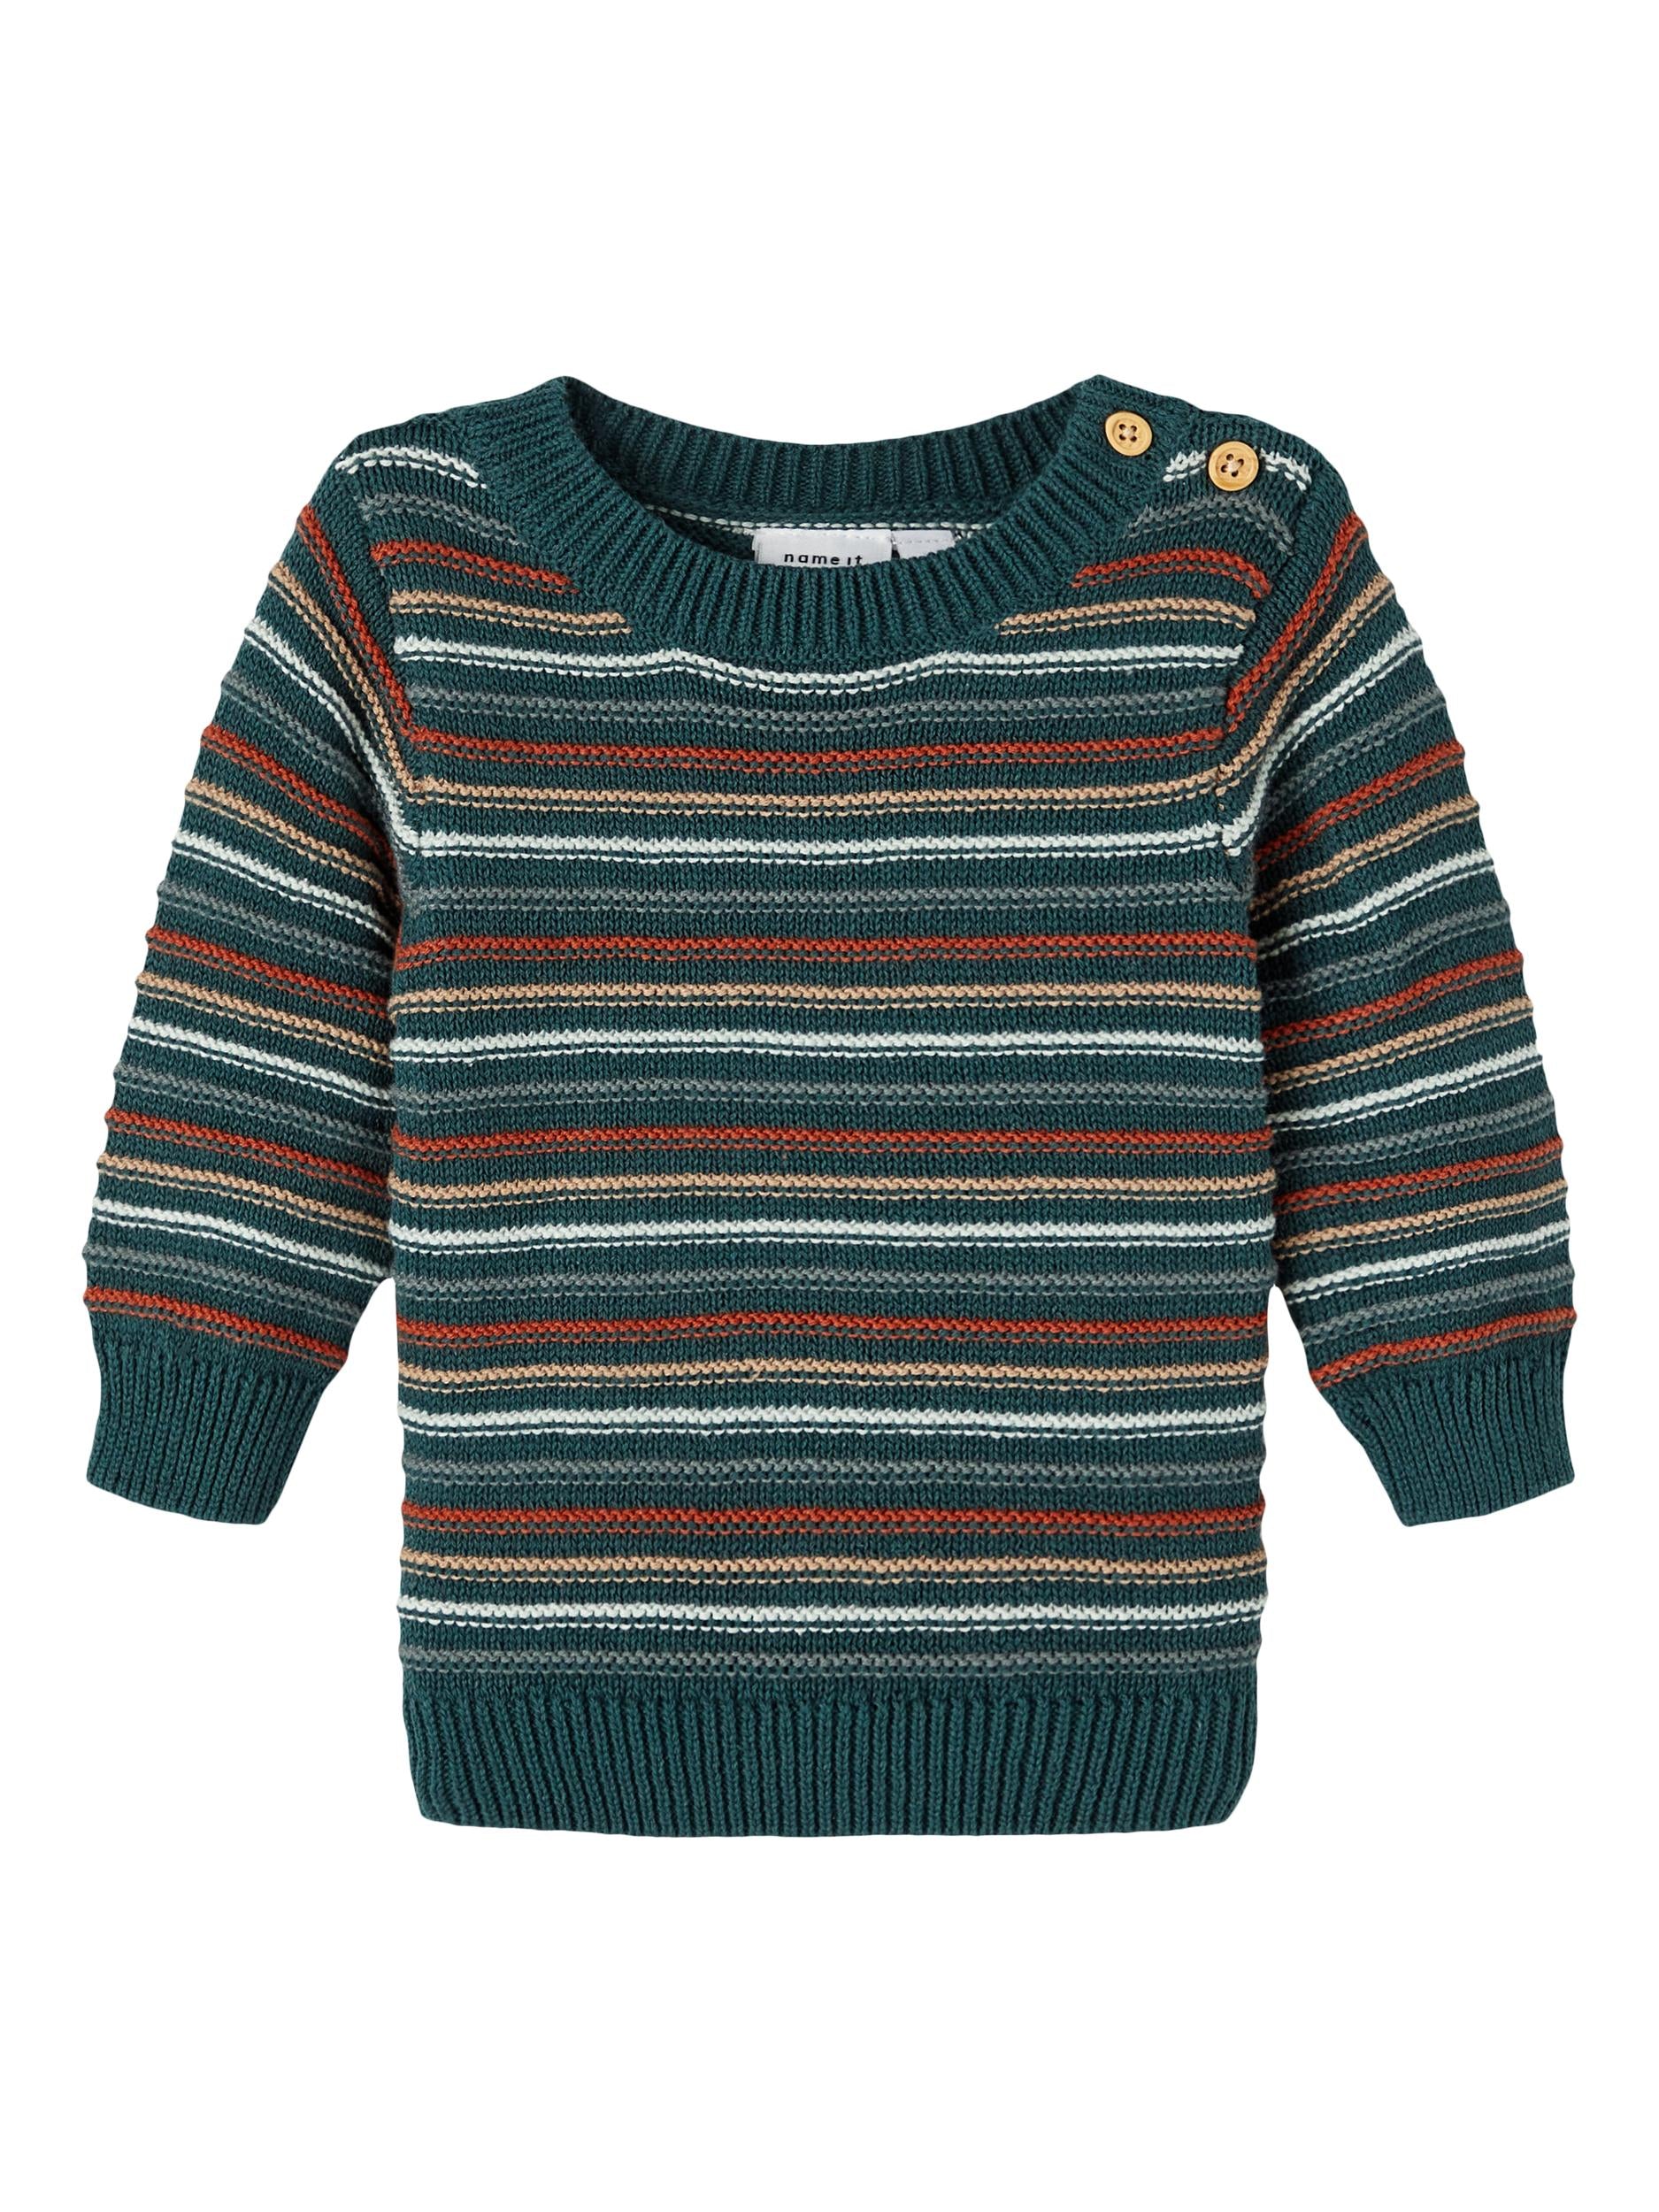 Boy's Sea Moss Silan Long Sleeve Knit-Front View